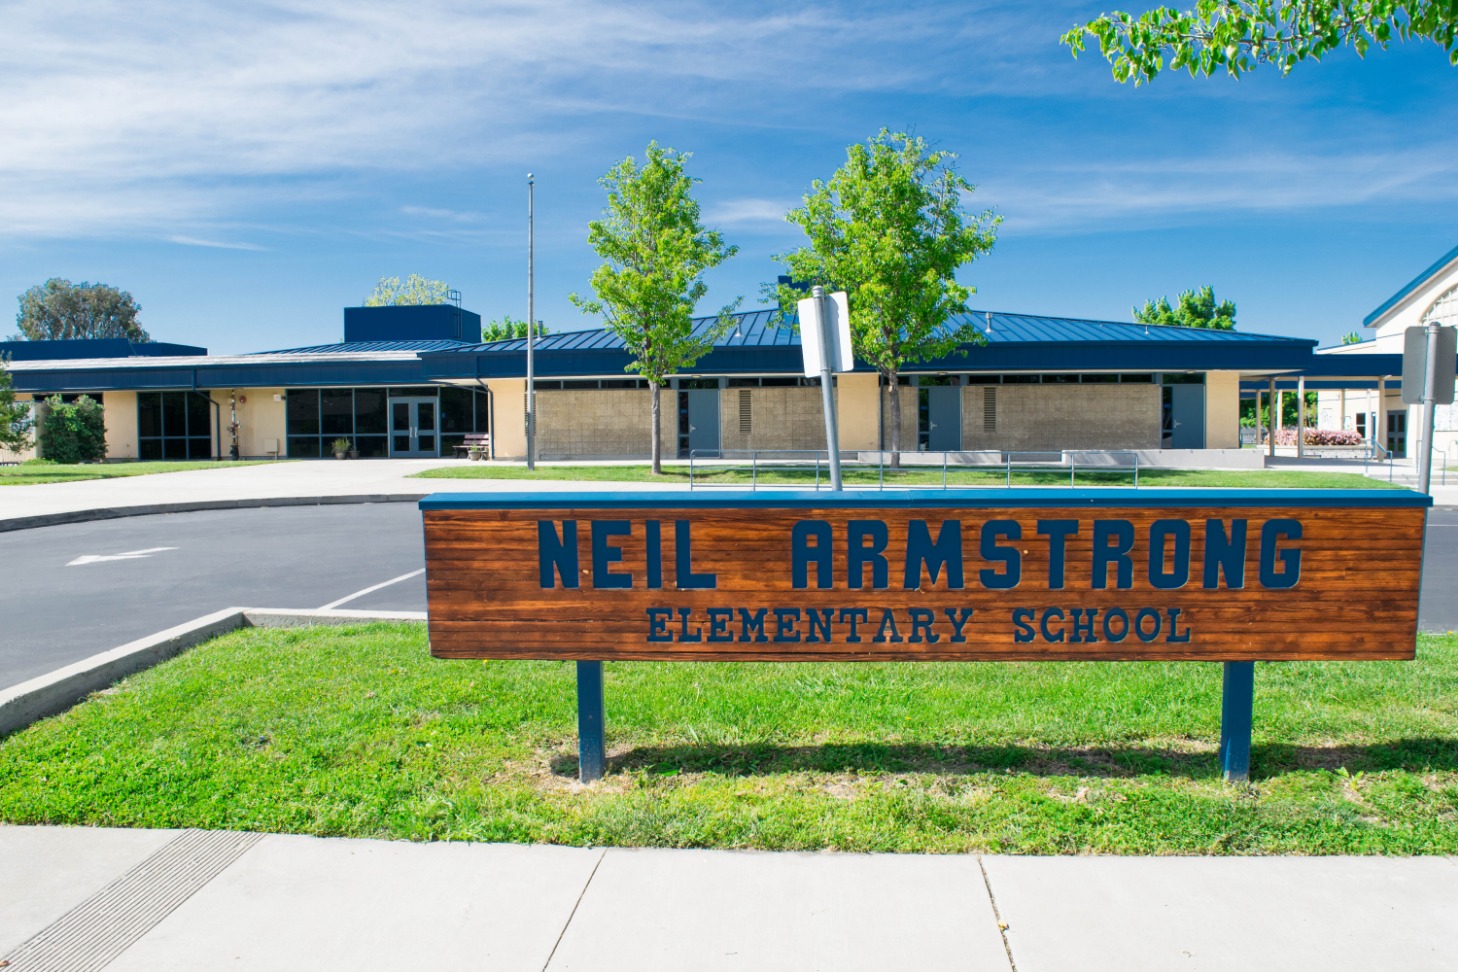 Neil Armstrong Elementary School